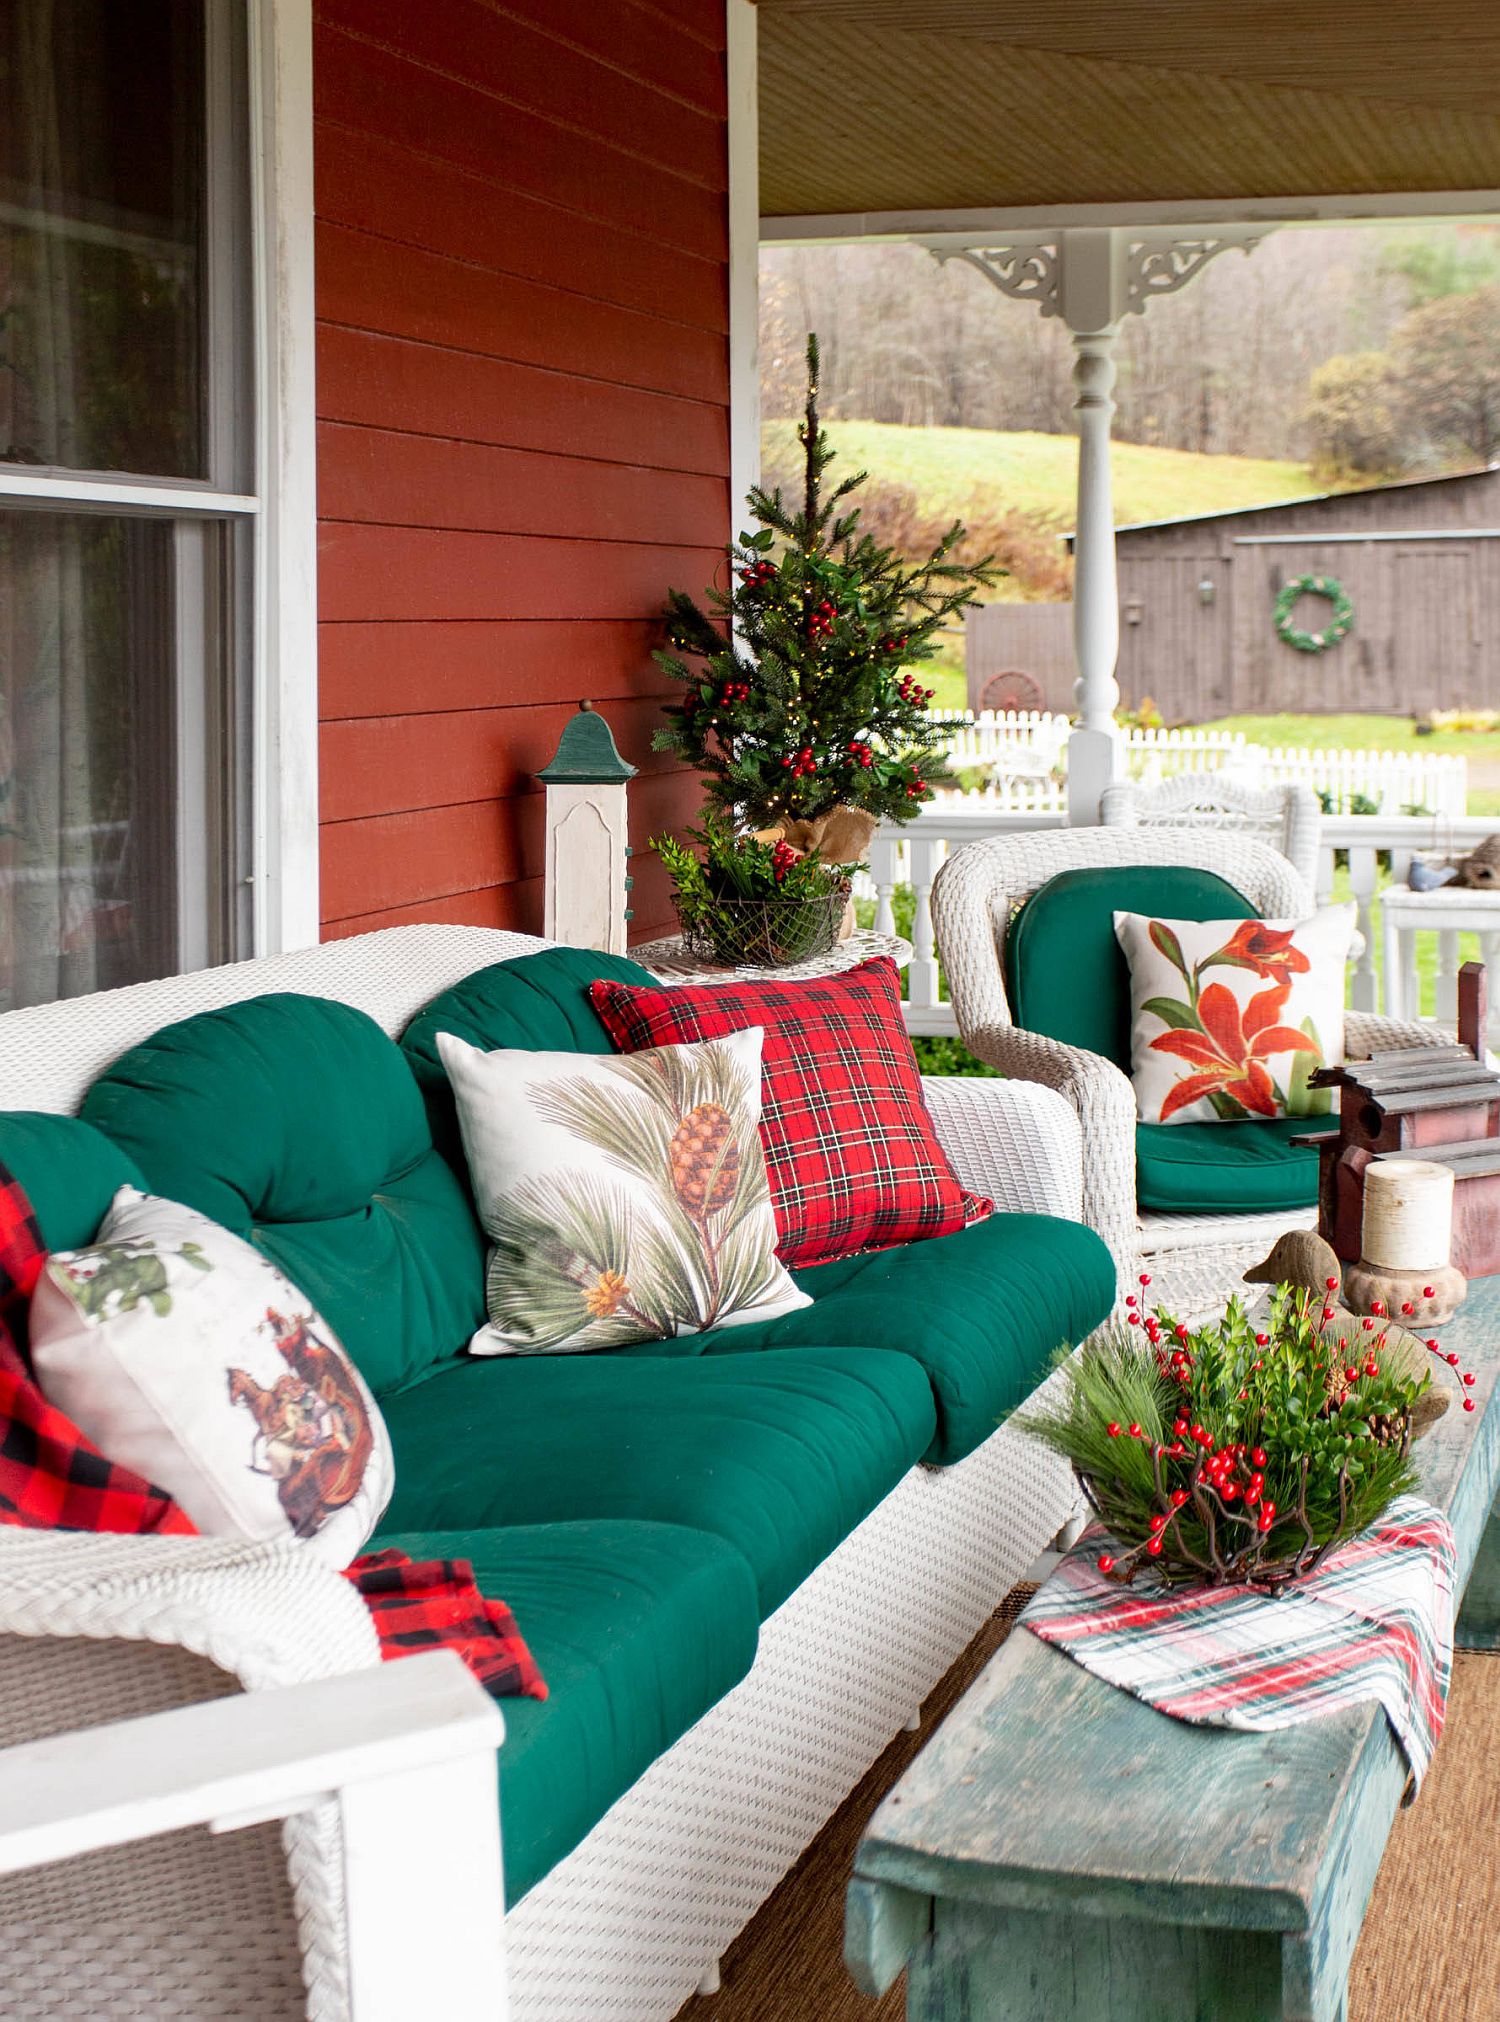 Change-the-colors-of-accent-pillows-and-cushions-of-the-outdoor-couch-to-create-a-more-festive-porch